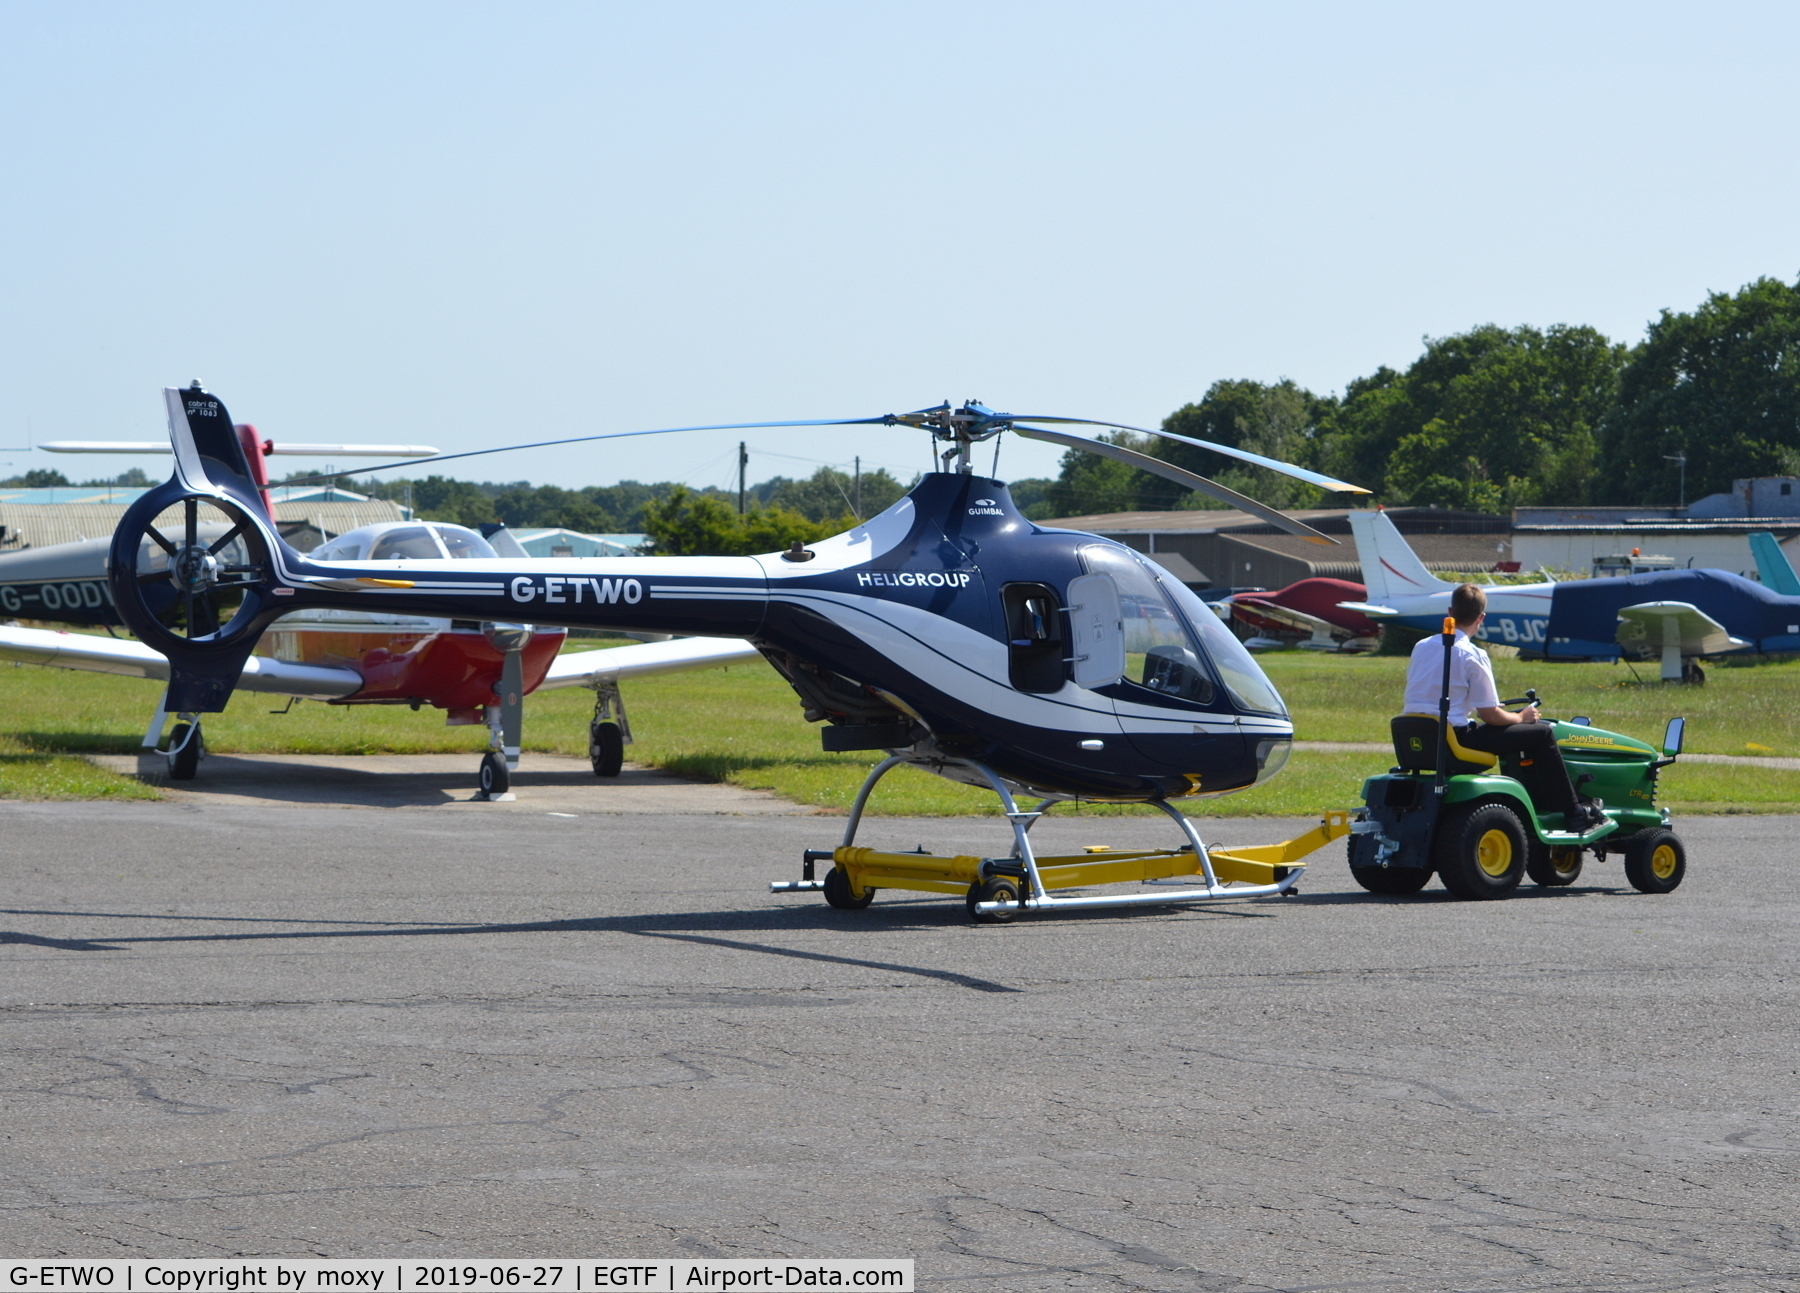 G-ETWO, 2014 Guimbal Cabri G2 C/N 1063, Guimbal Cabri G2 being towed to the hangar at Fairoaks.